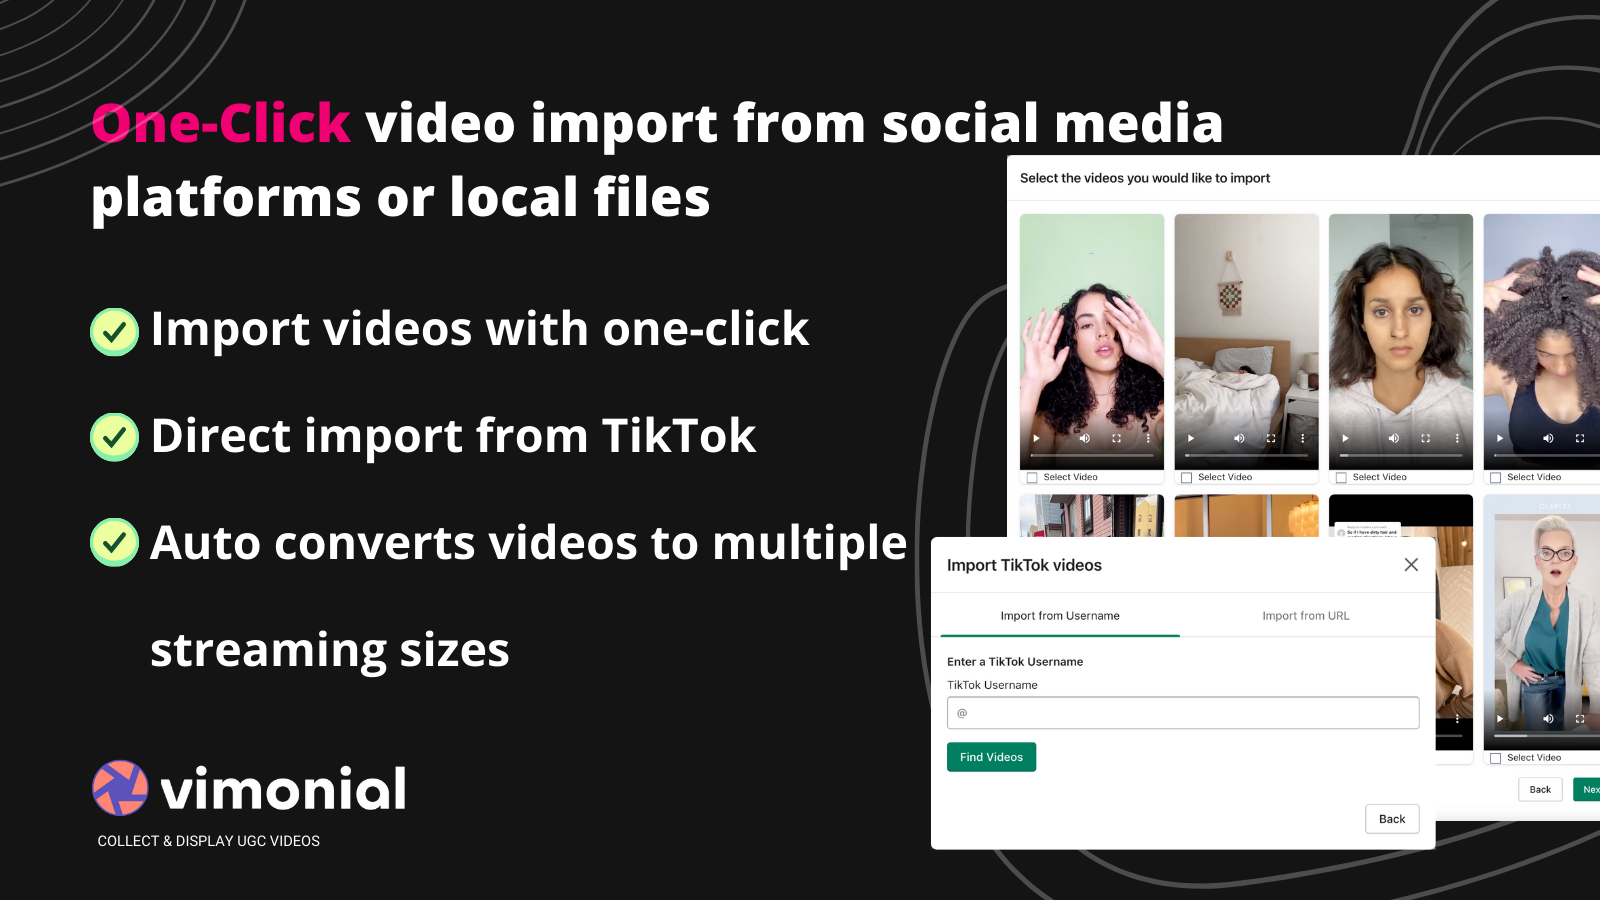 One-Click video import from social platforms or local fiels